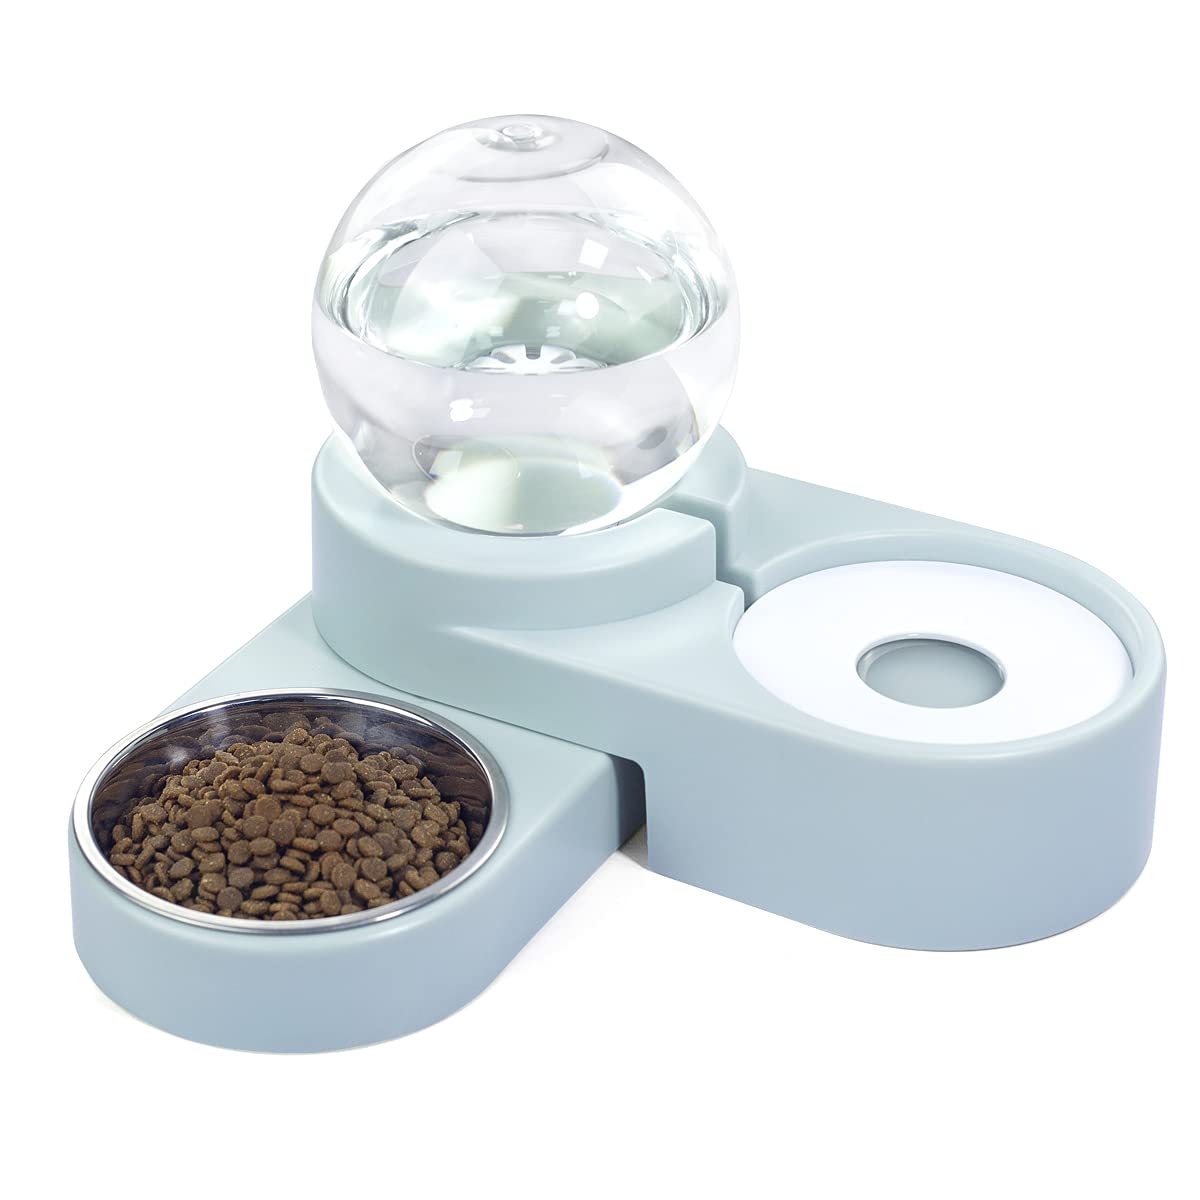 maohegou 2 in 1 Cat Water Dispenser,Cat Food Bowl,Dog Feeder, Automatic cat Water Feeder,pet Food and Water Dispenser Set